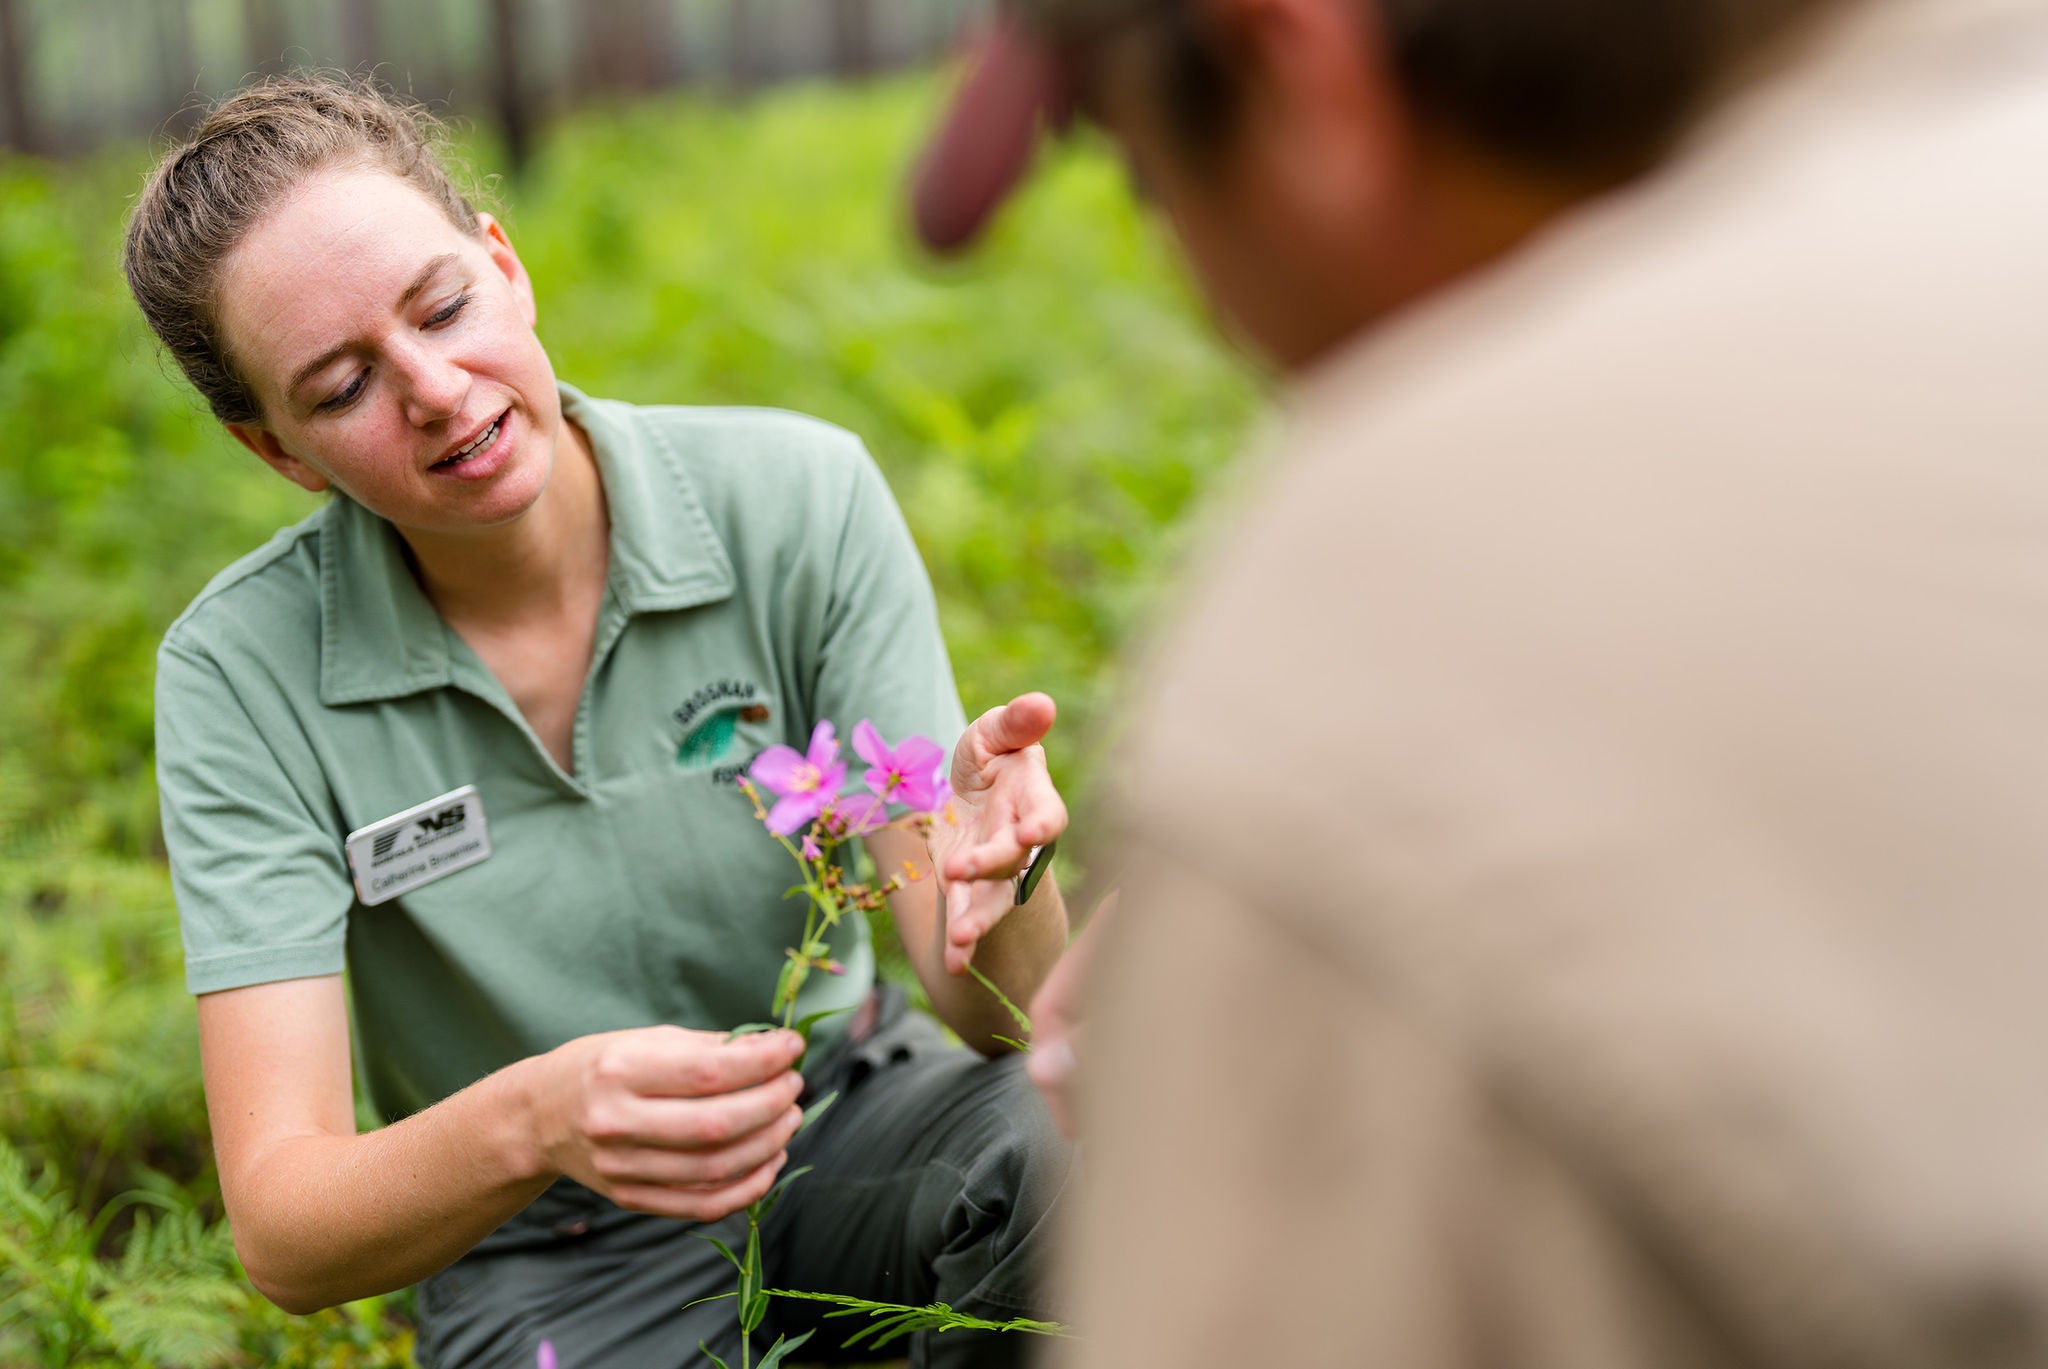 Norfolk Southern employee using sustainability practices in rail shipping in a field holding a flower